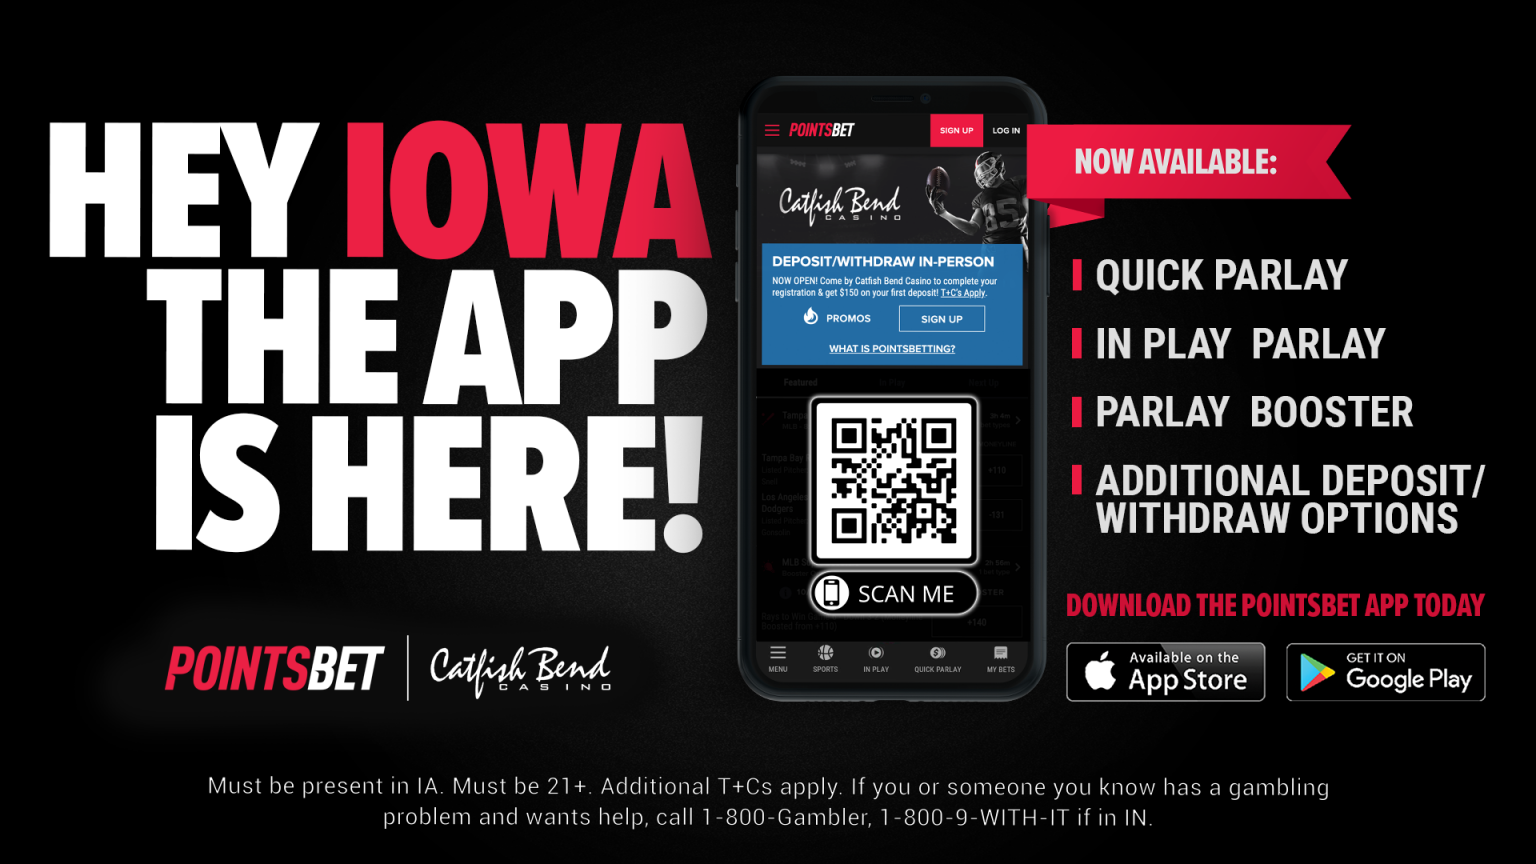 Download the PointsBet App Today!